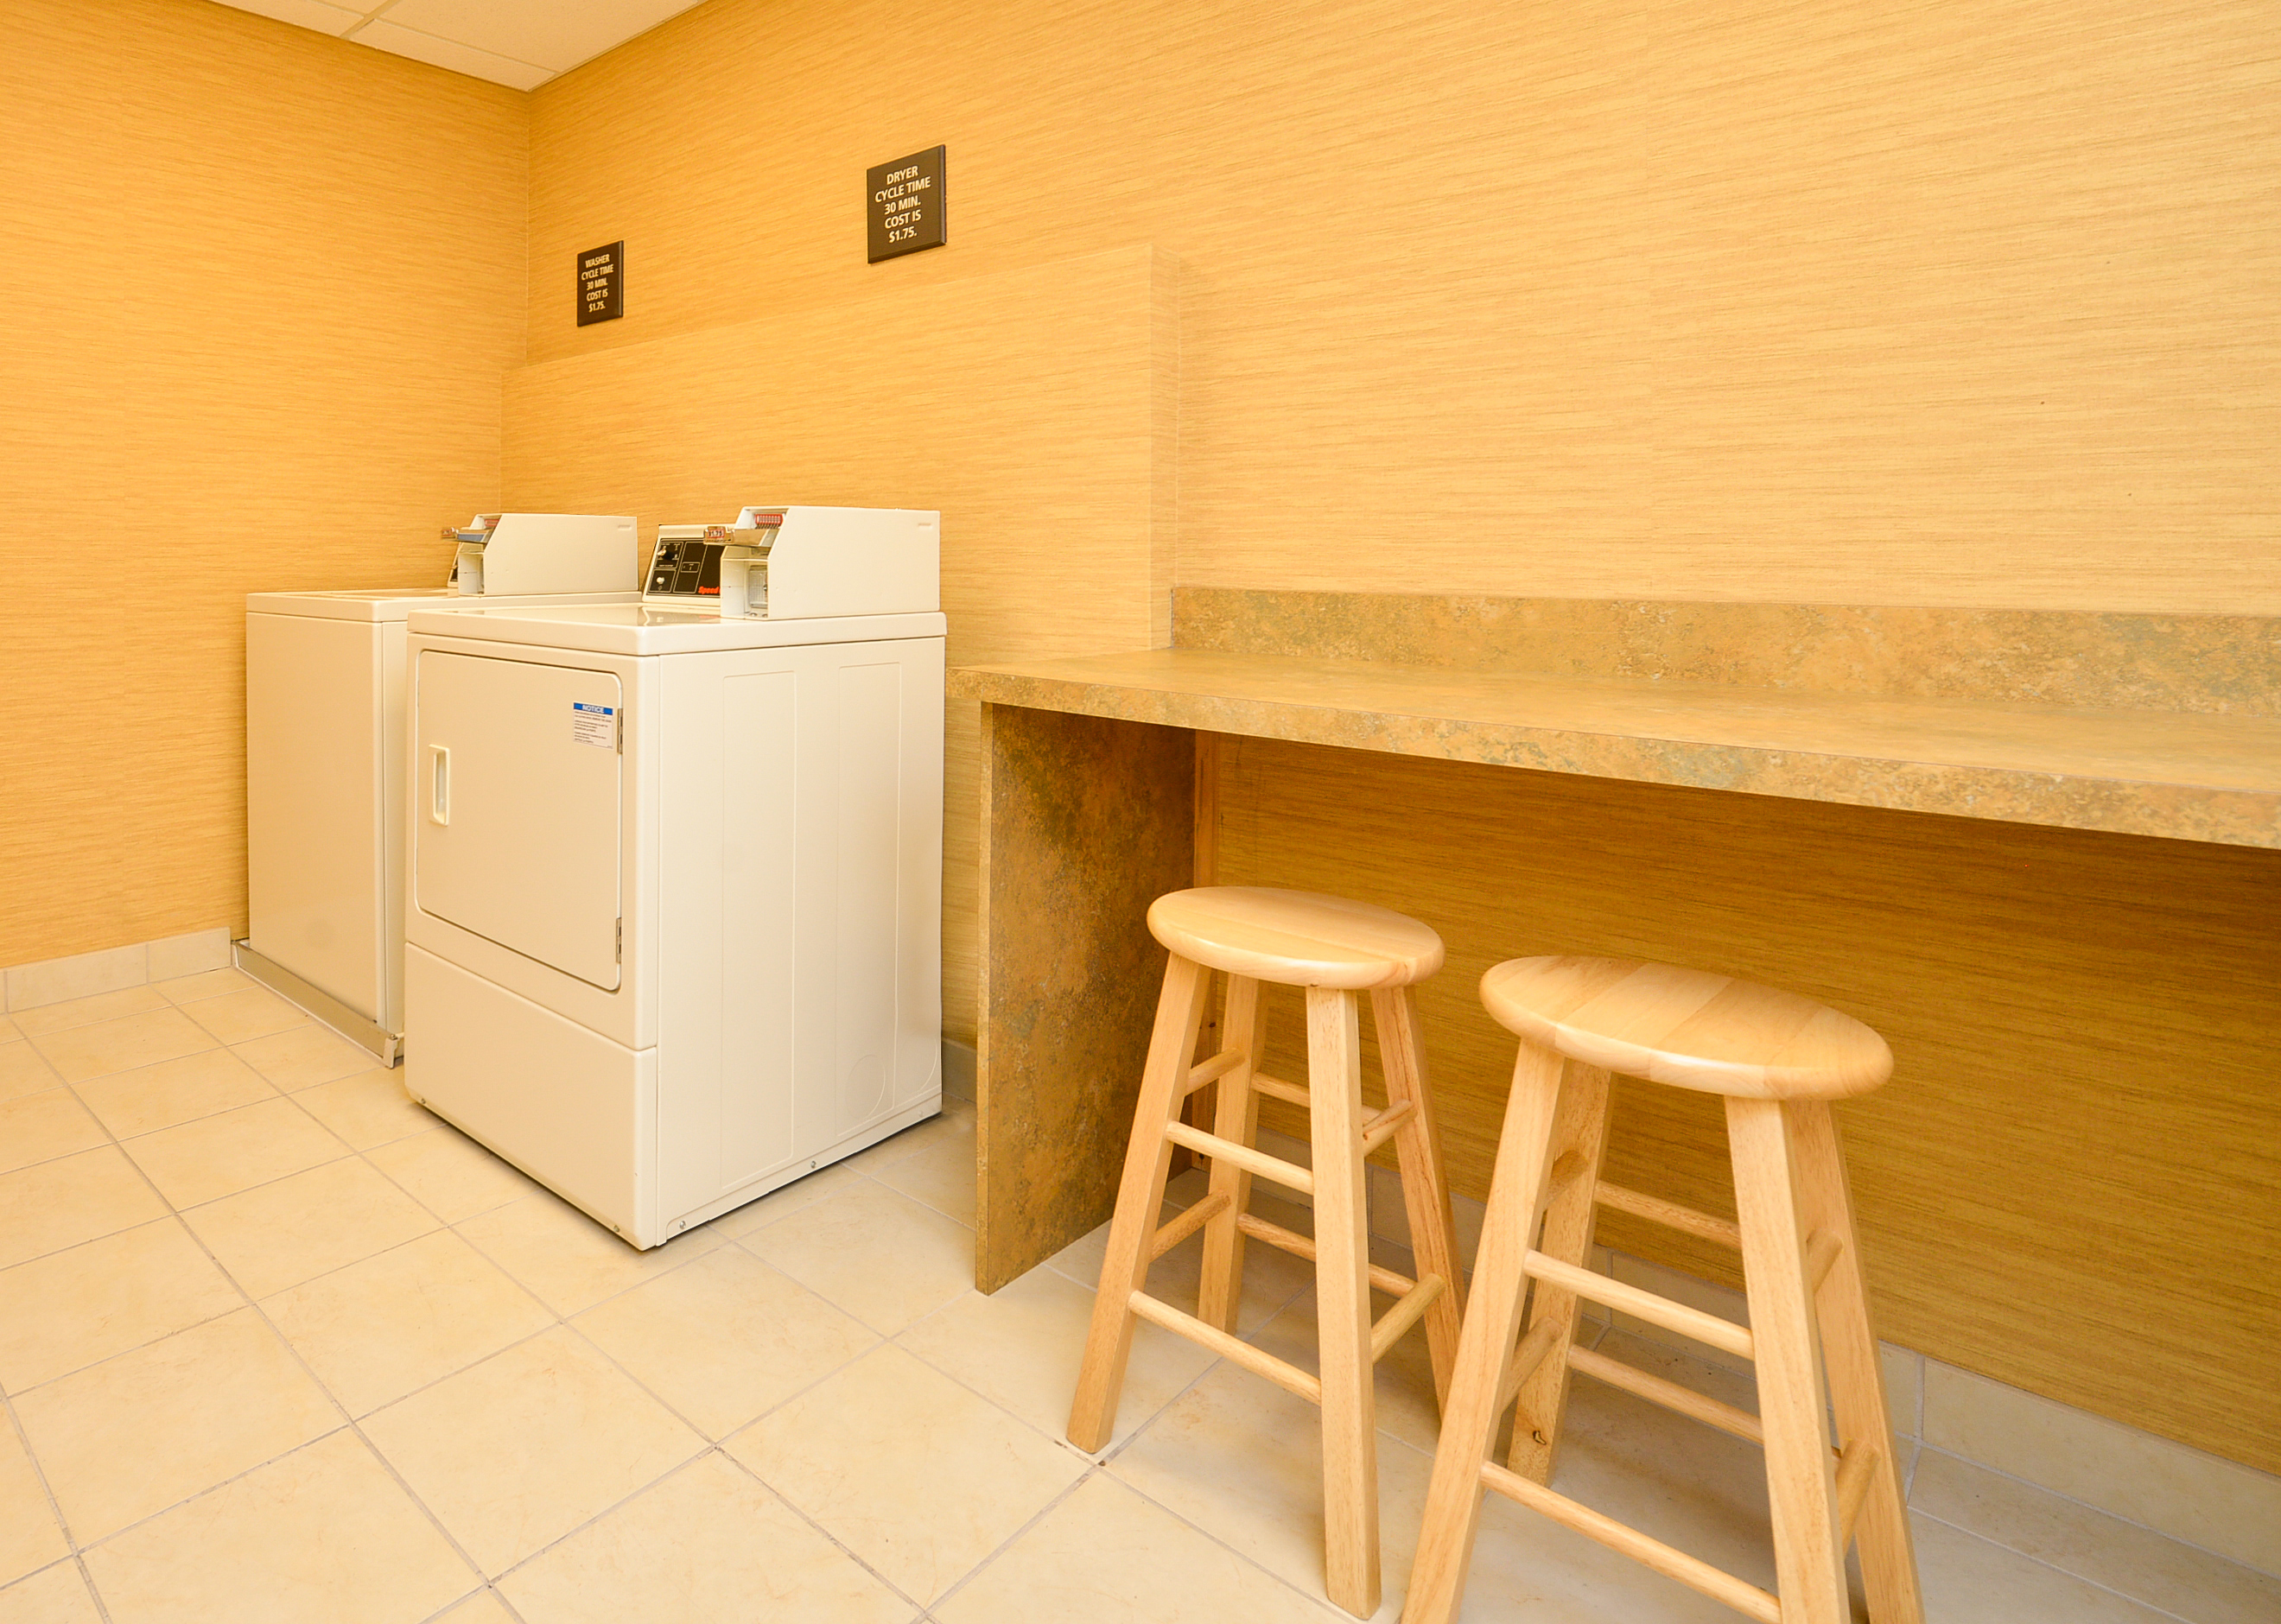 Laundry Area With Coin Operated Washing and Drying Machines, Folding Table and Two Wooden Stools